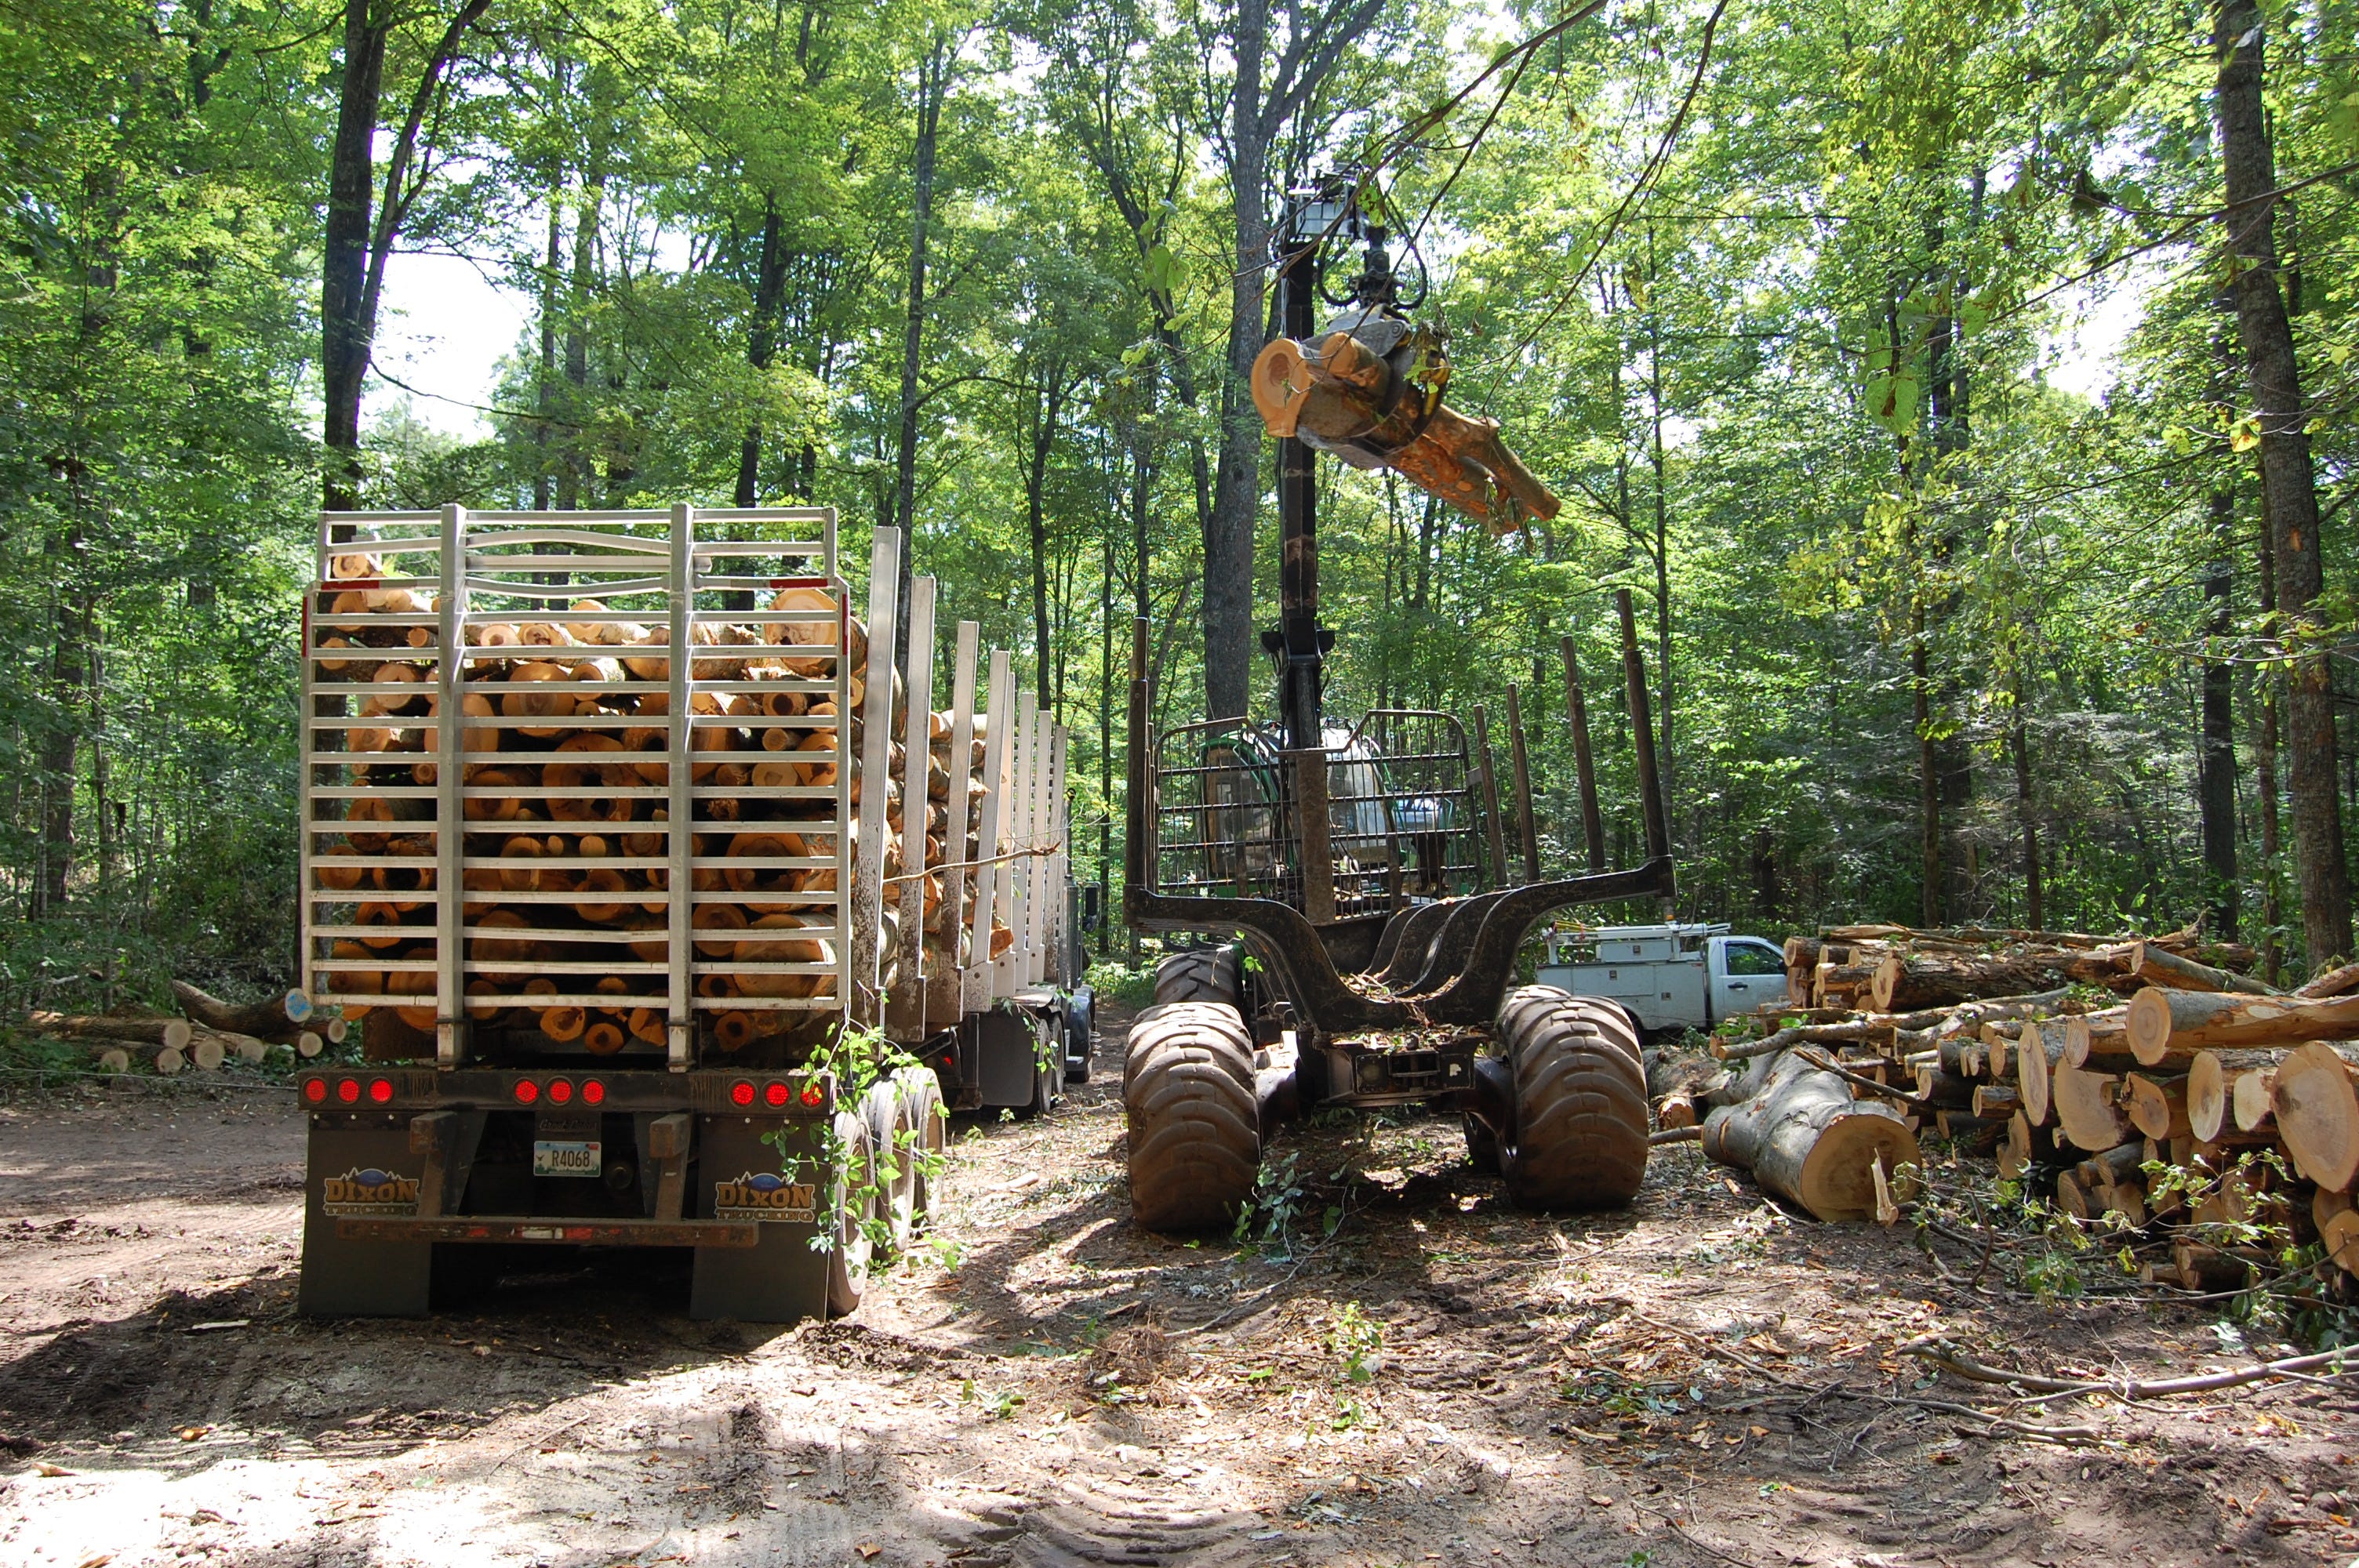 Menominee Tribal Enterprises employs careful precision to sustainably harvest the Menominee Forest.